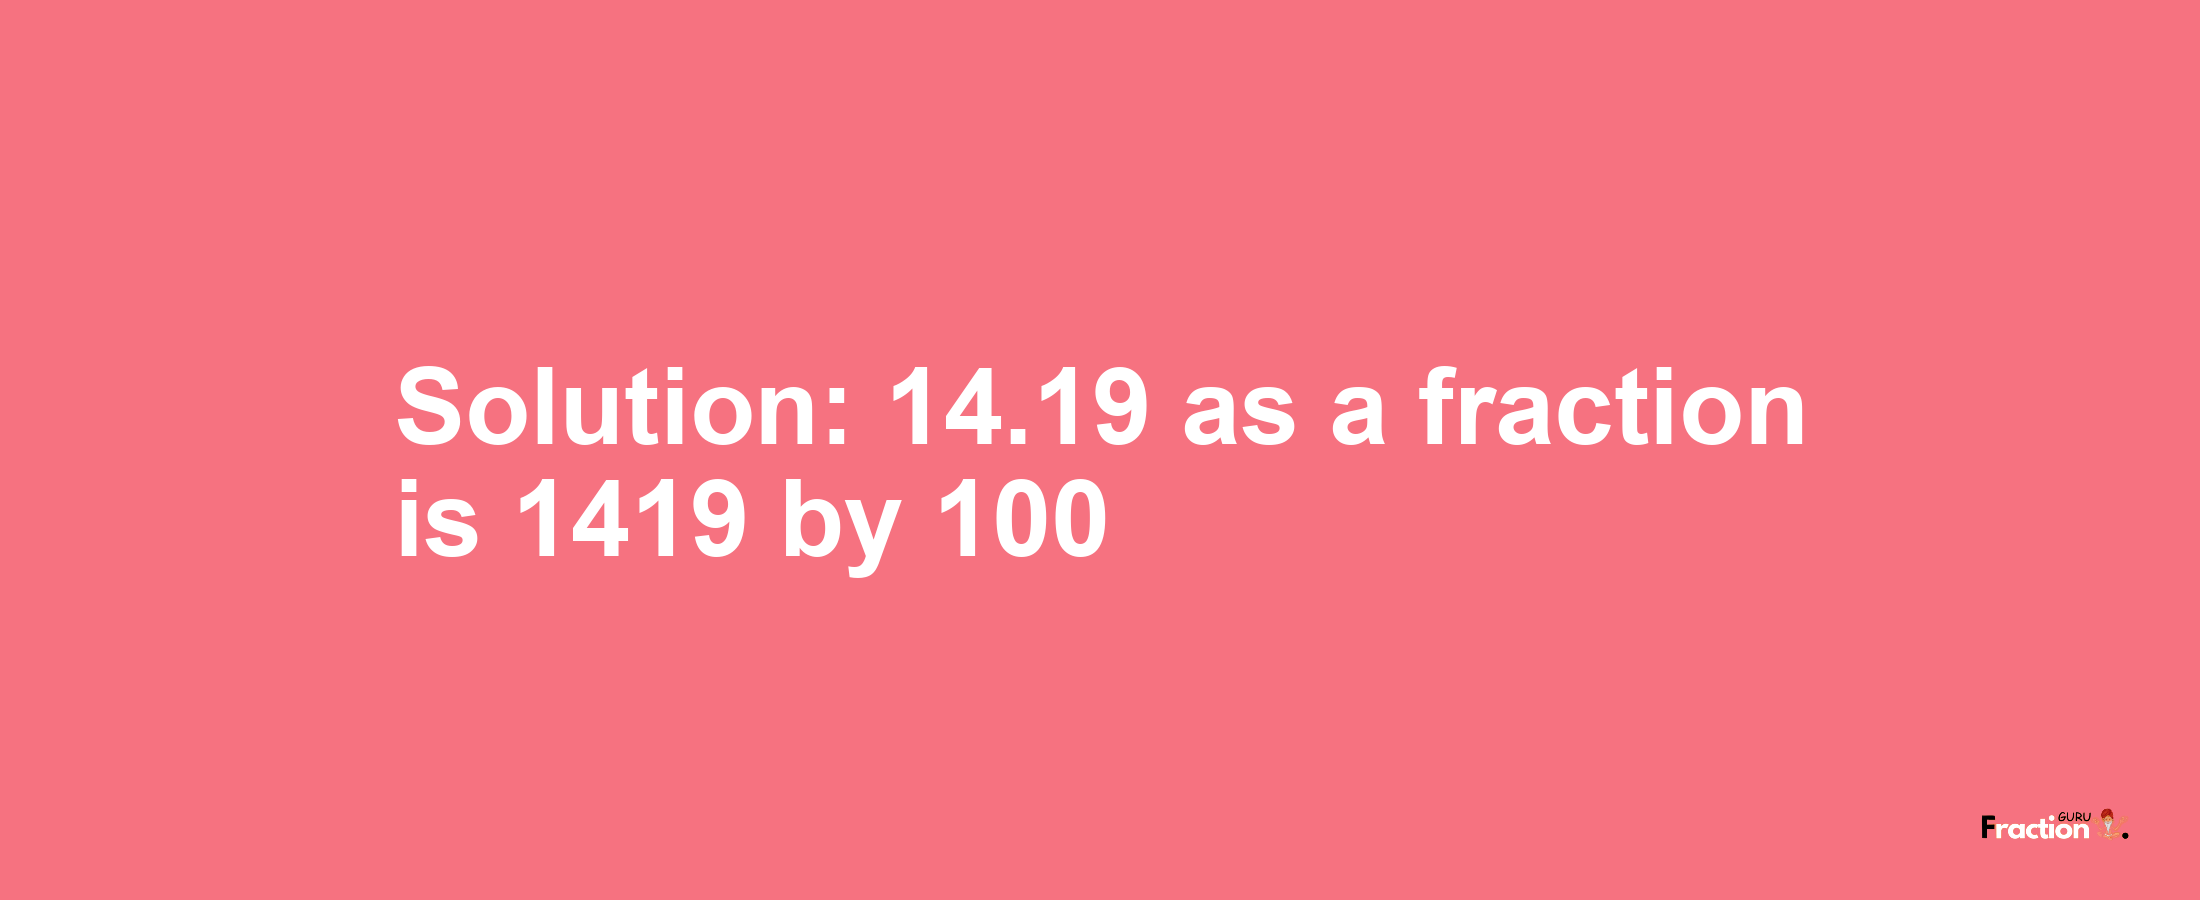 Solution:14.19 as a fraction is 1419/100